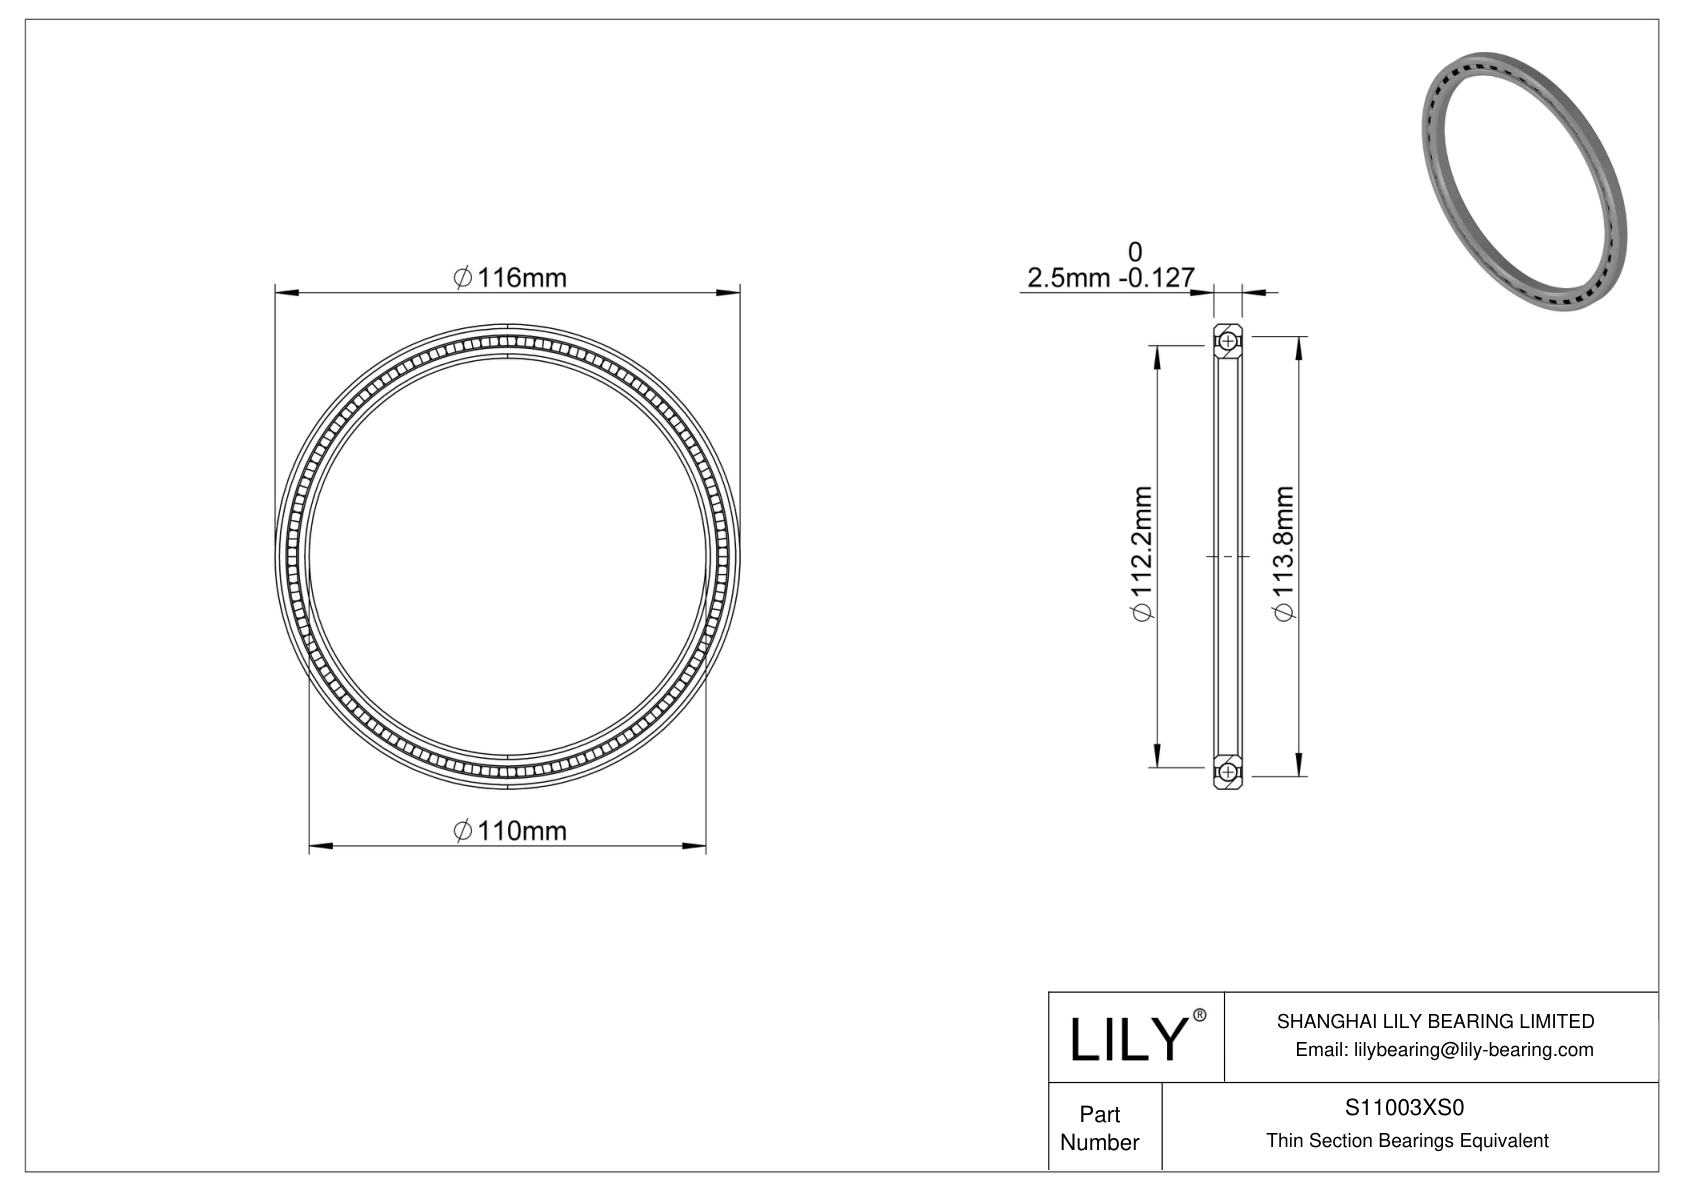 S11003XS0 Constant Section (CS) Bearings cad drawing